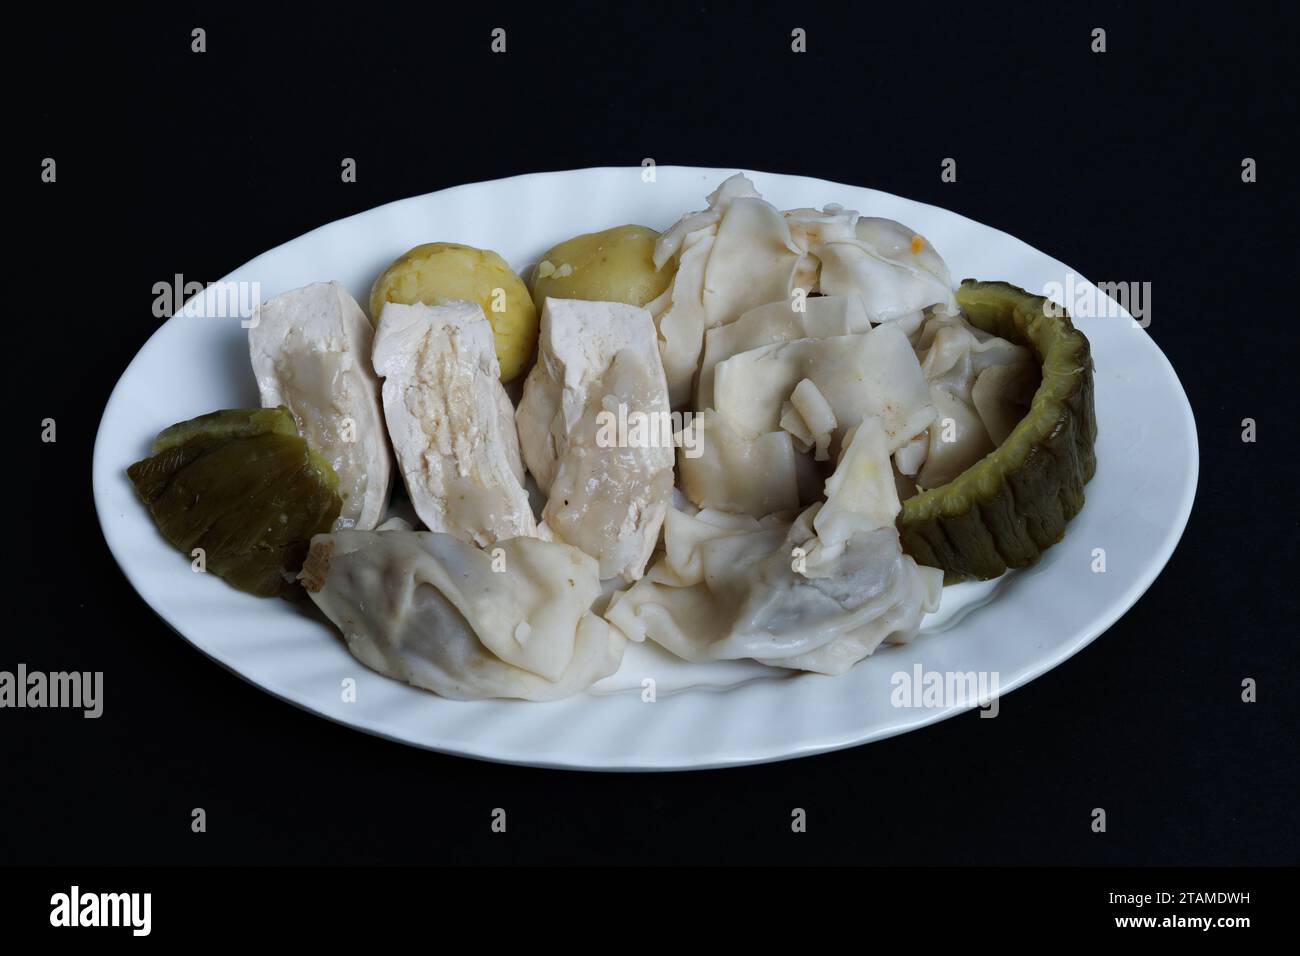 Siomay Bandung or steamed dumplings, Indonesian traditional street food. no peanut souce. on white plate isolated on black background. Stock Photo